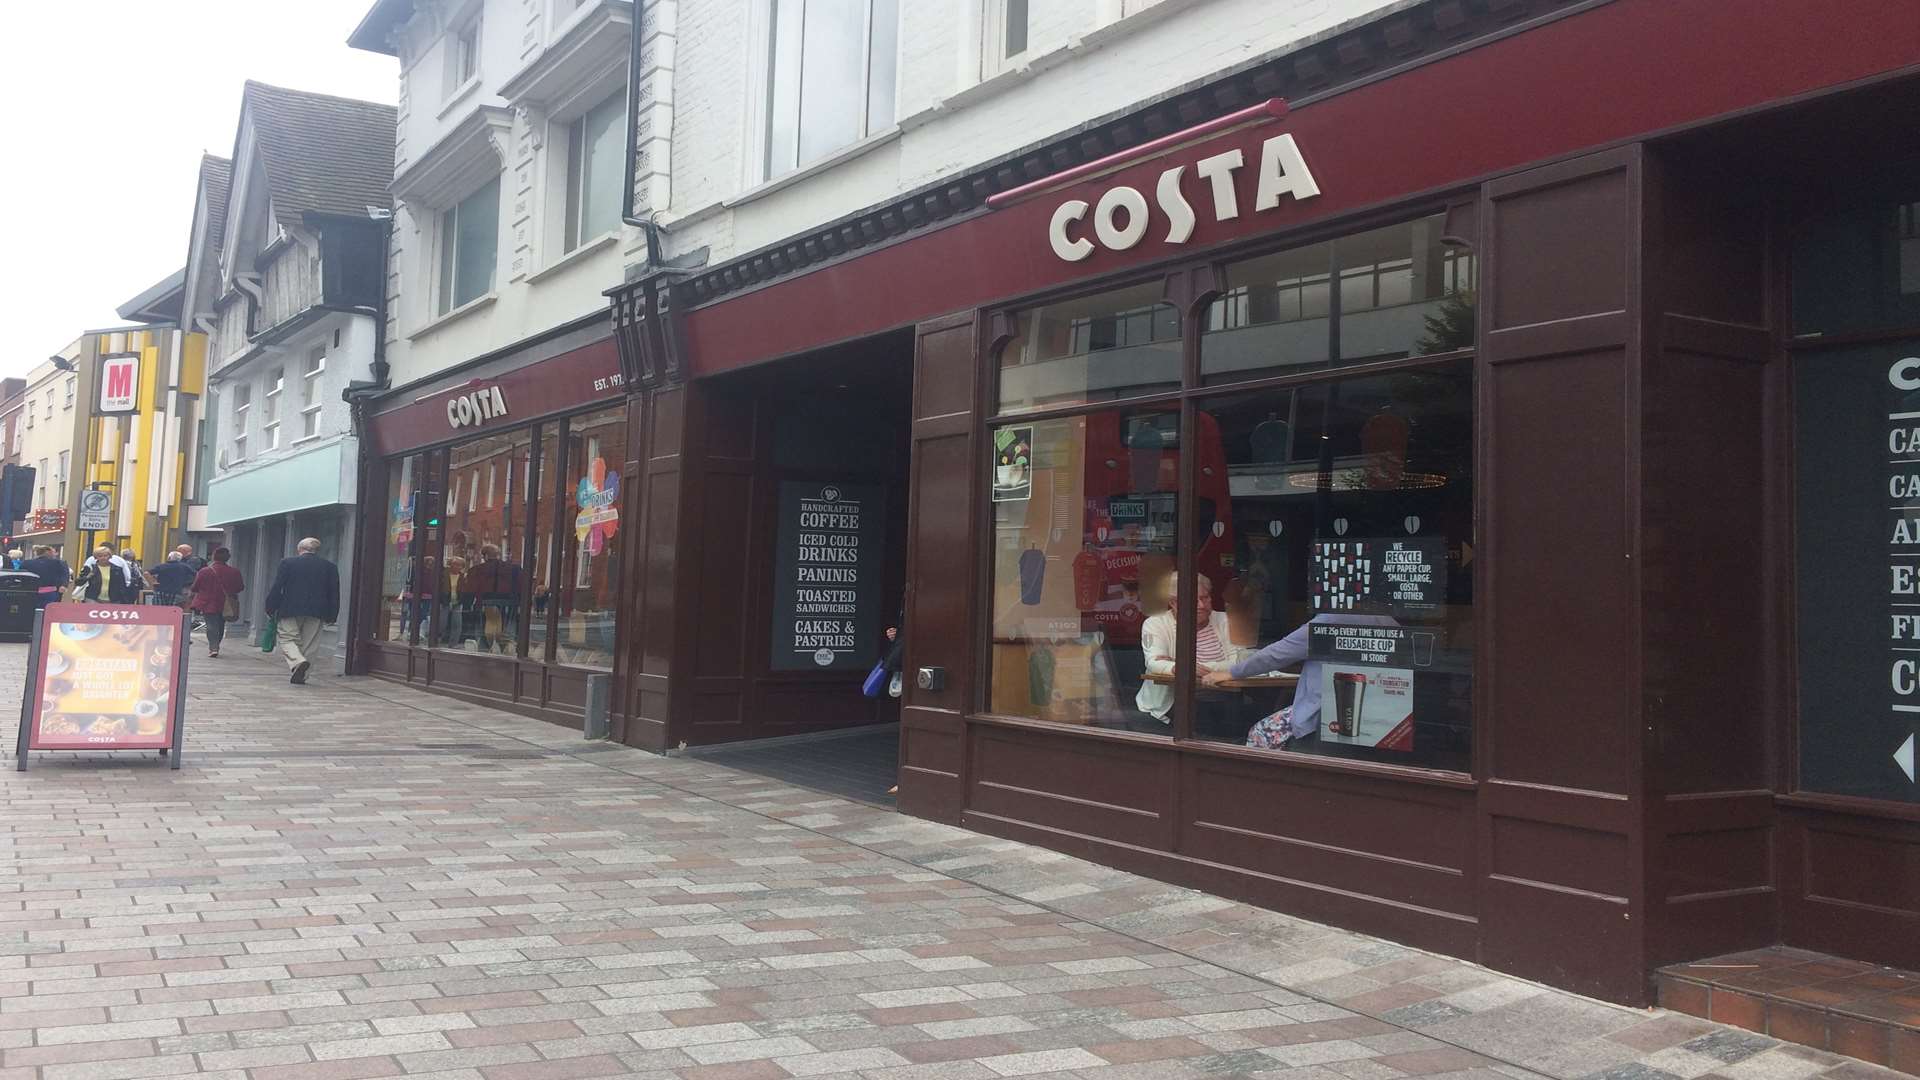 A spy cam was also found in public toilets at a branch of Costa Coffee